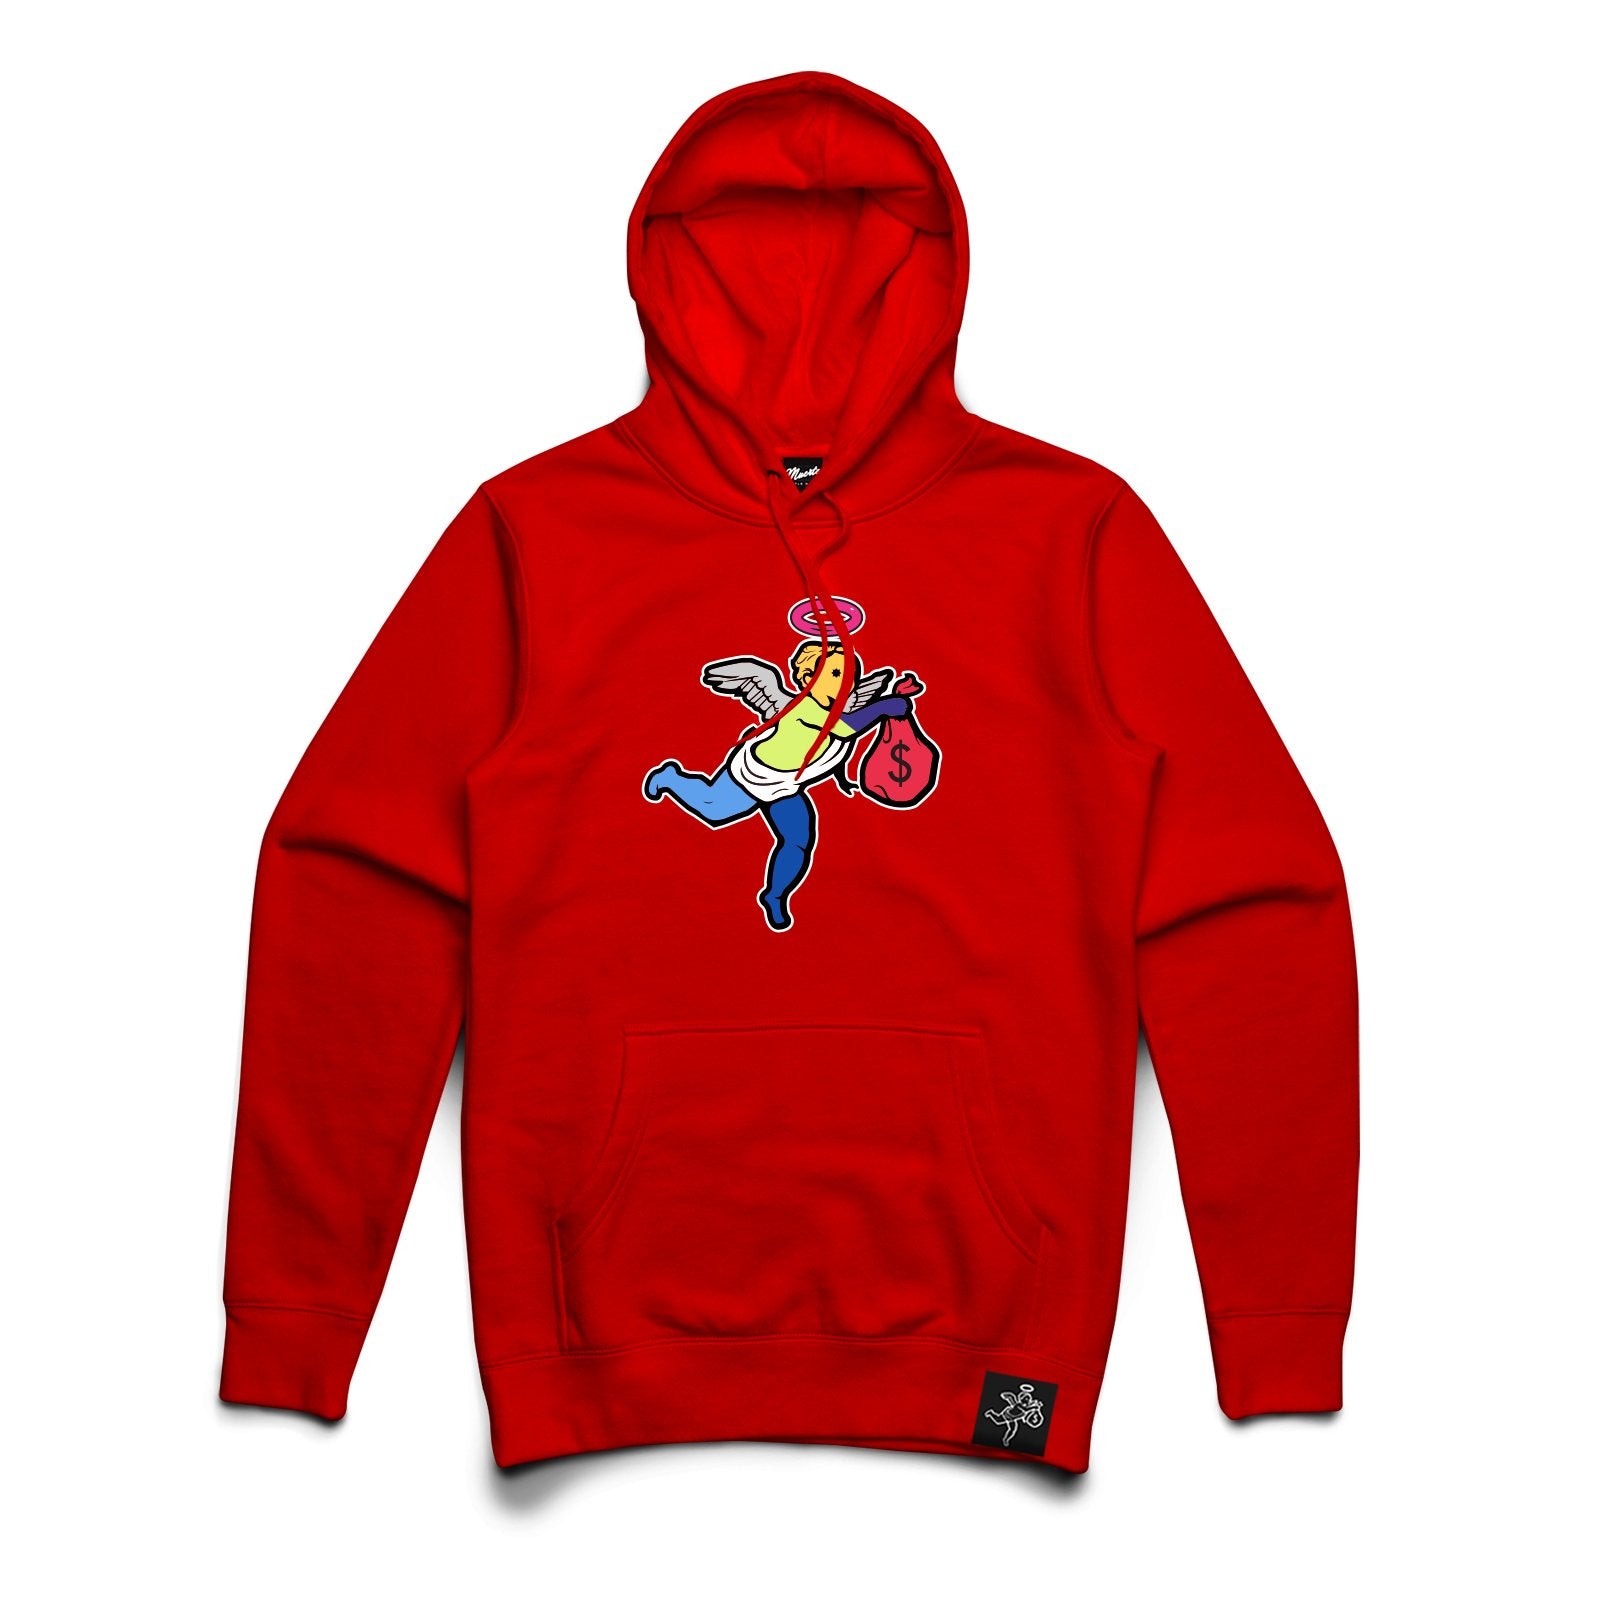 AJ5 WT ANGEL CHENILLE PATCH Hoodie Big and Tall